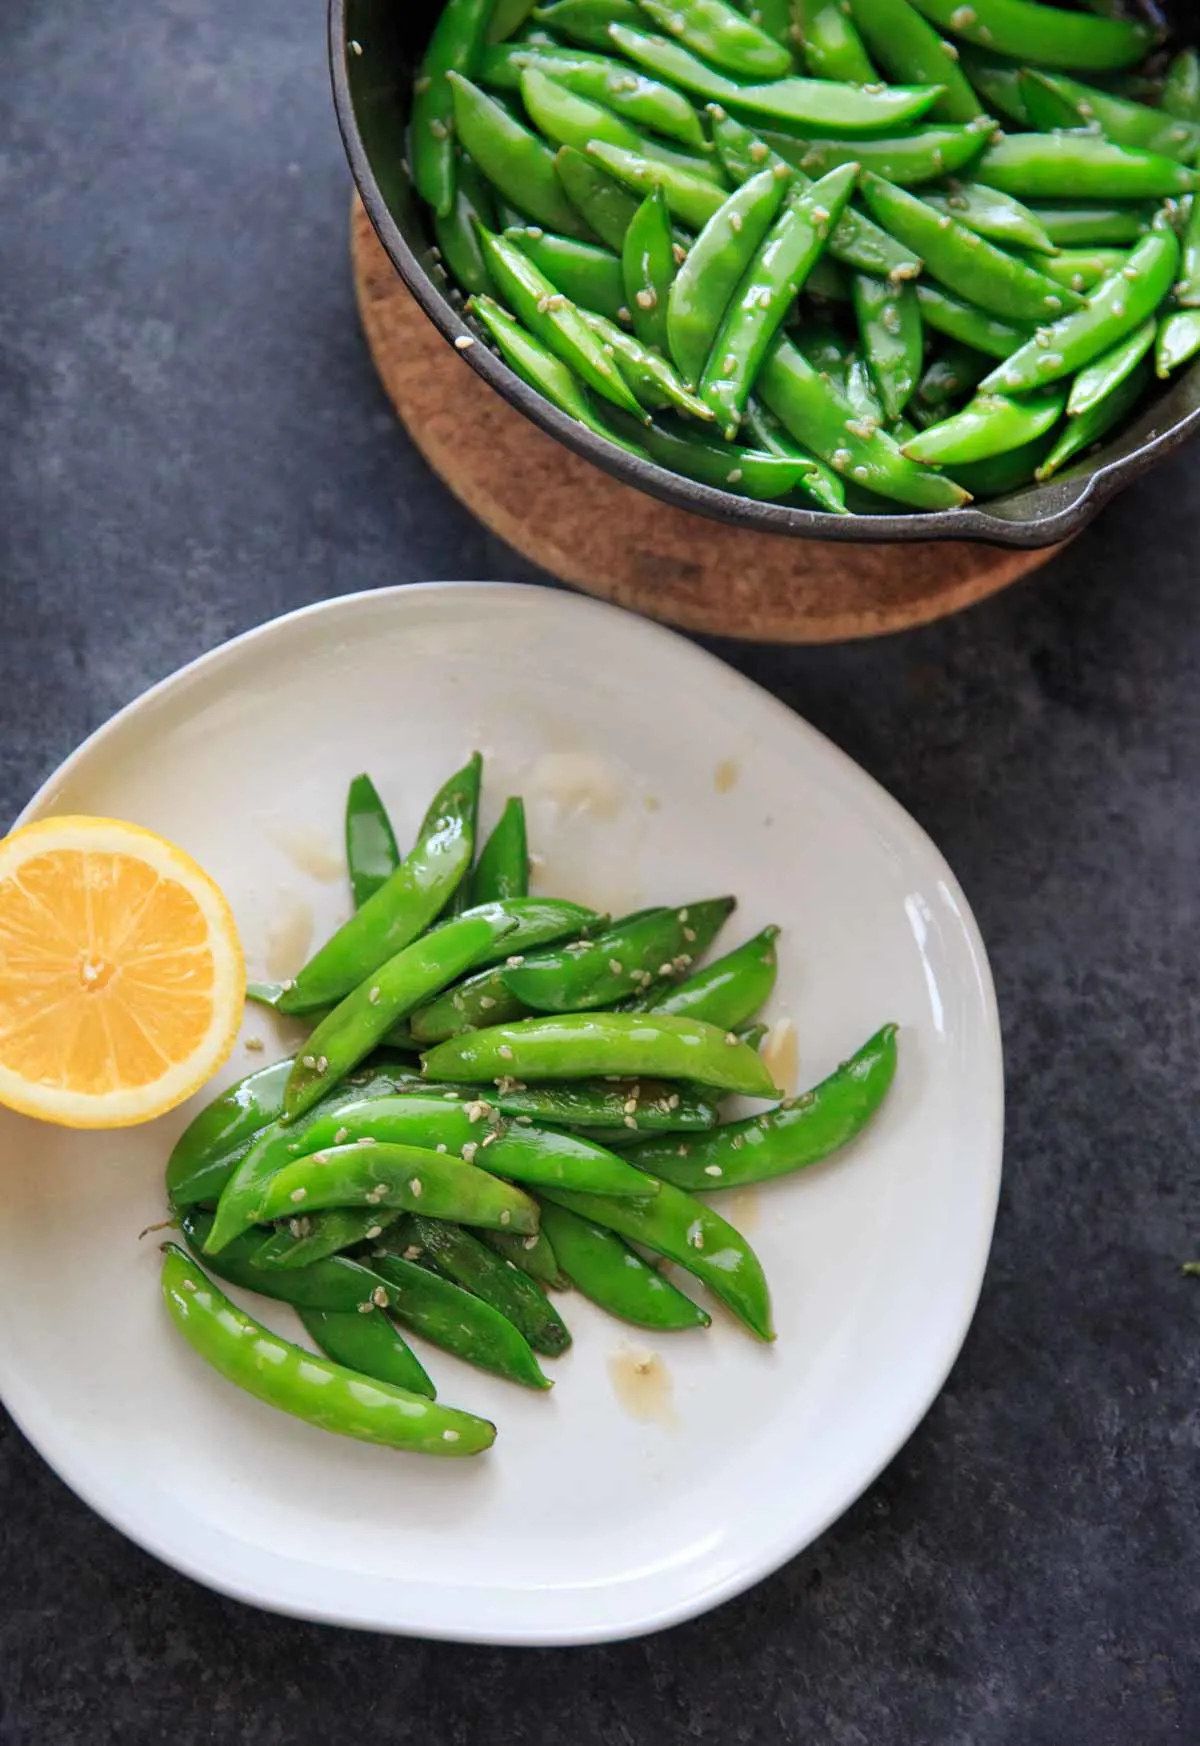 A citrusy and tasty vegetable side dish - Stir-fried Lemon Sesame Sugar Snap Peas! Eat as is for a side, add to pasta or salads.